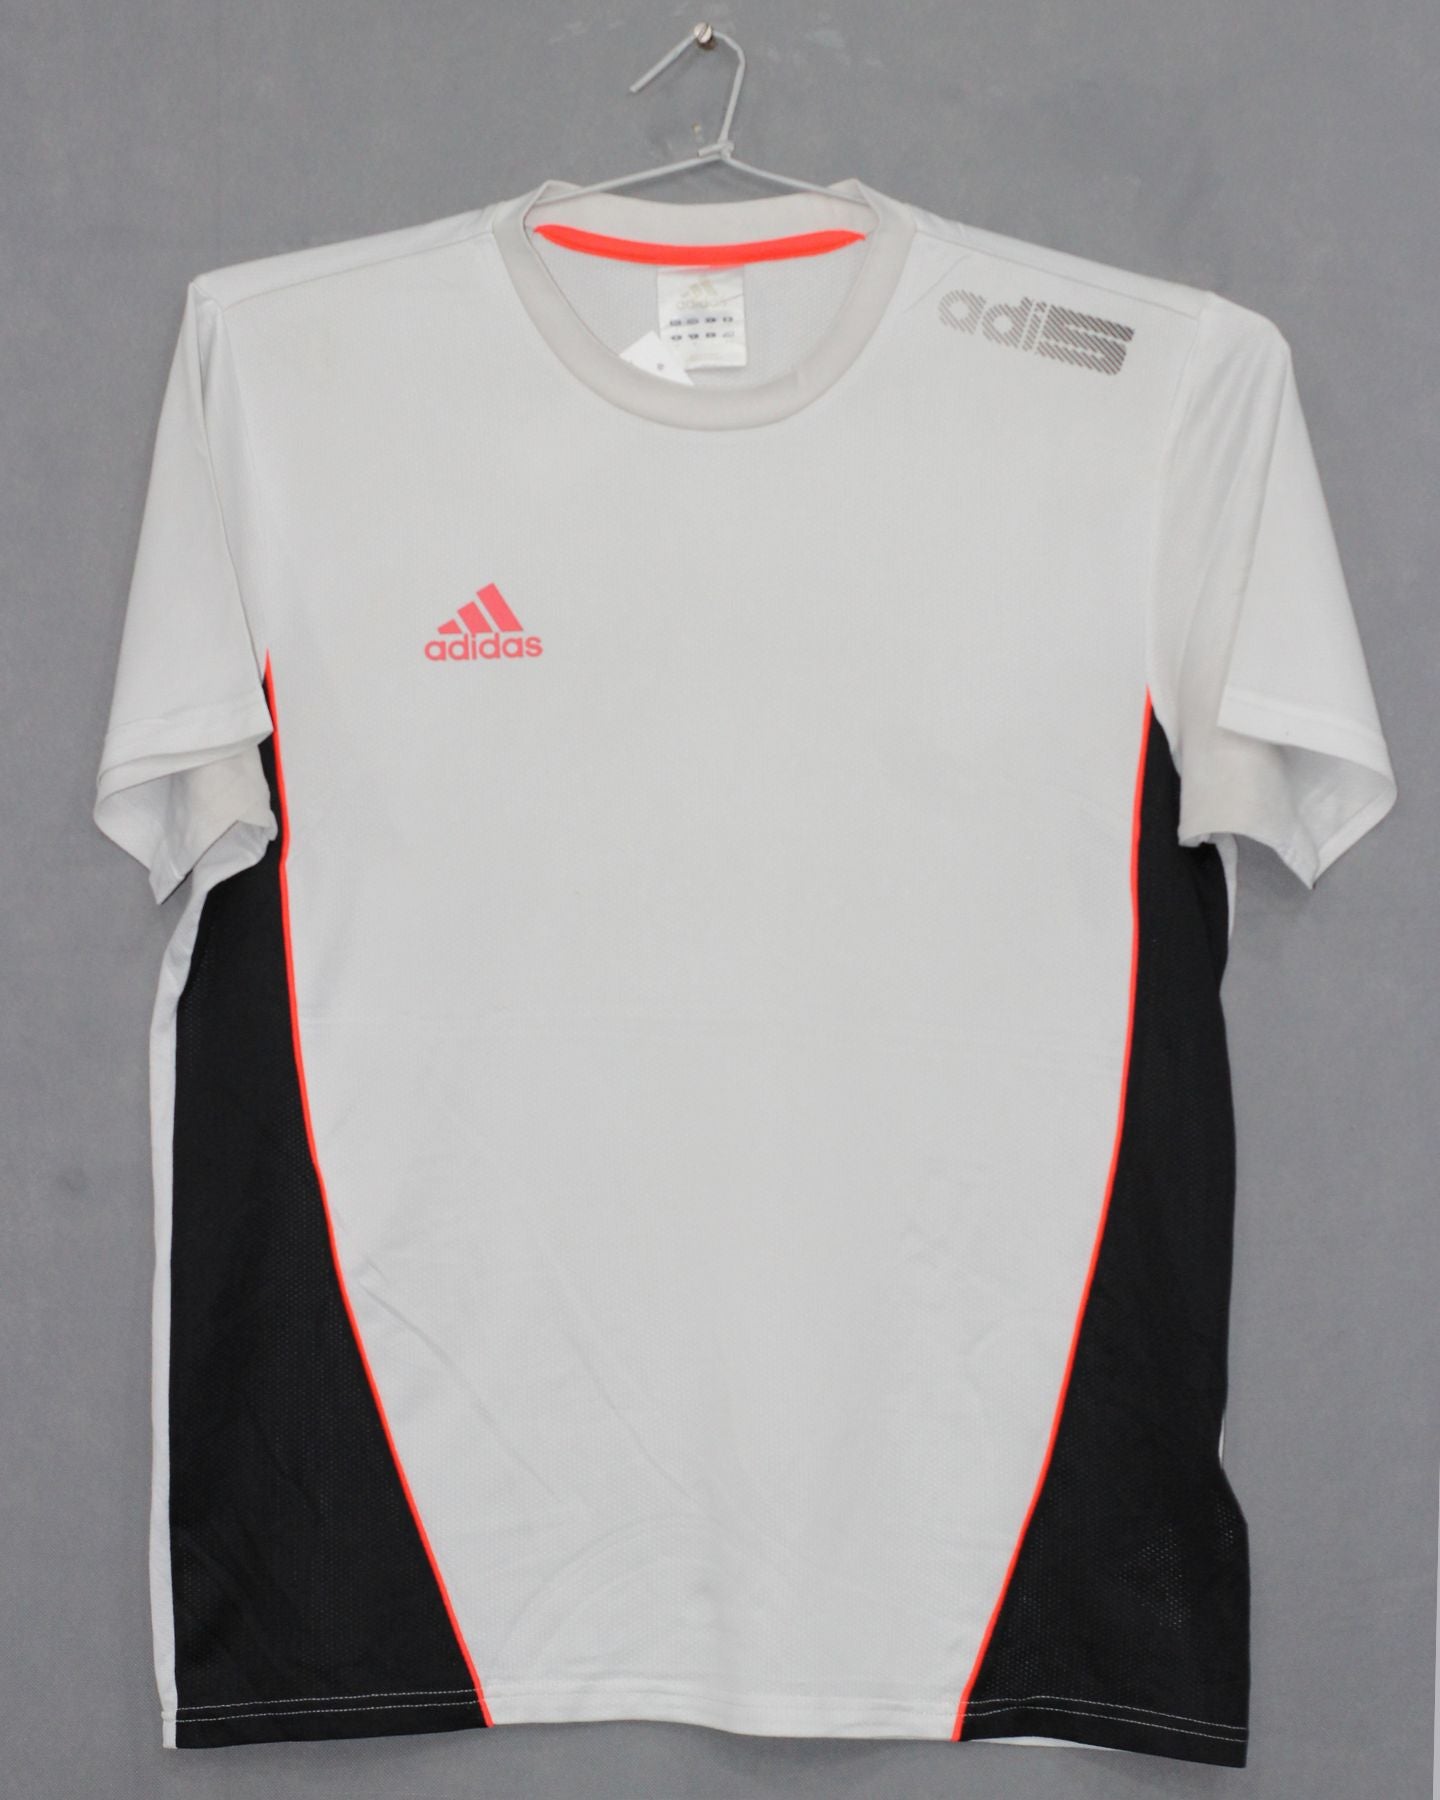 Adidas Branded Original For Polyester Sports Round Neck Men T Shirt